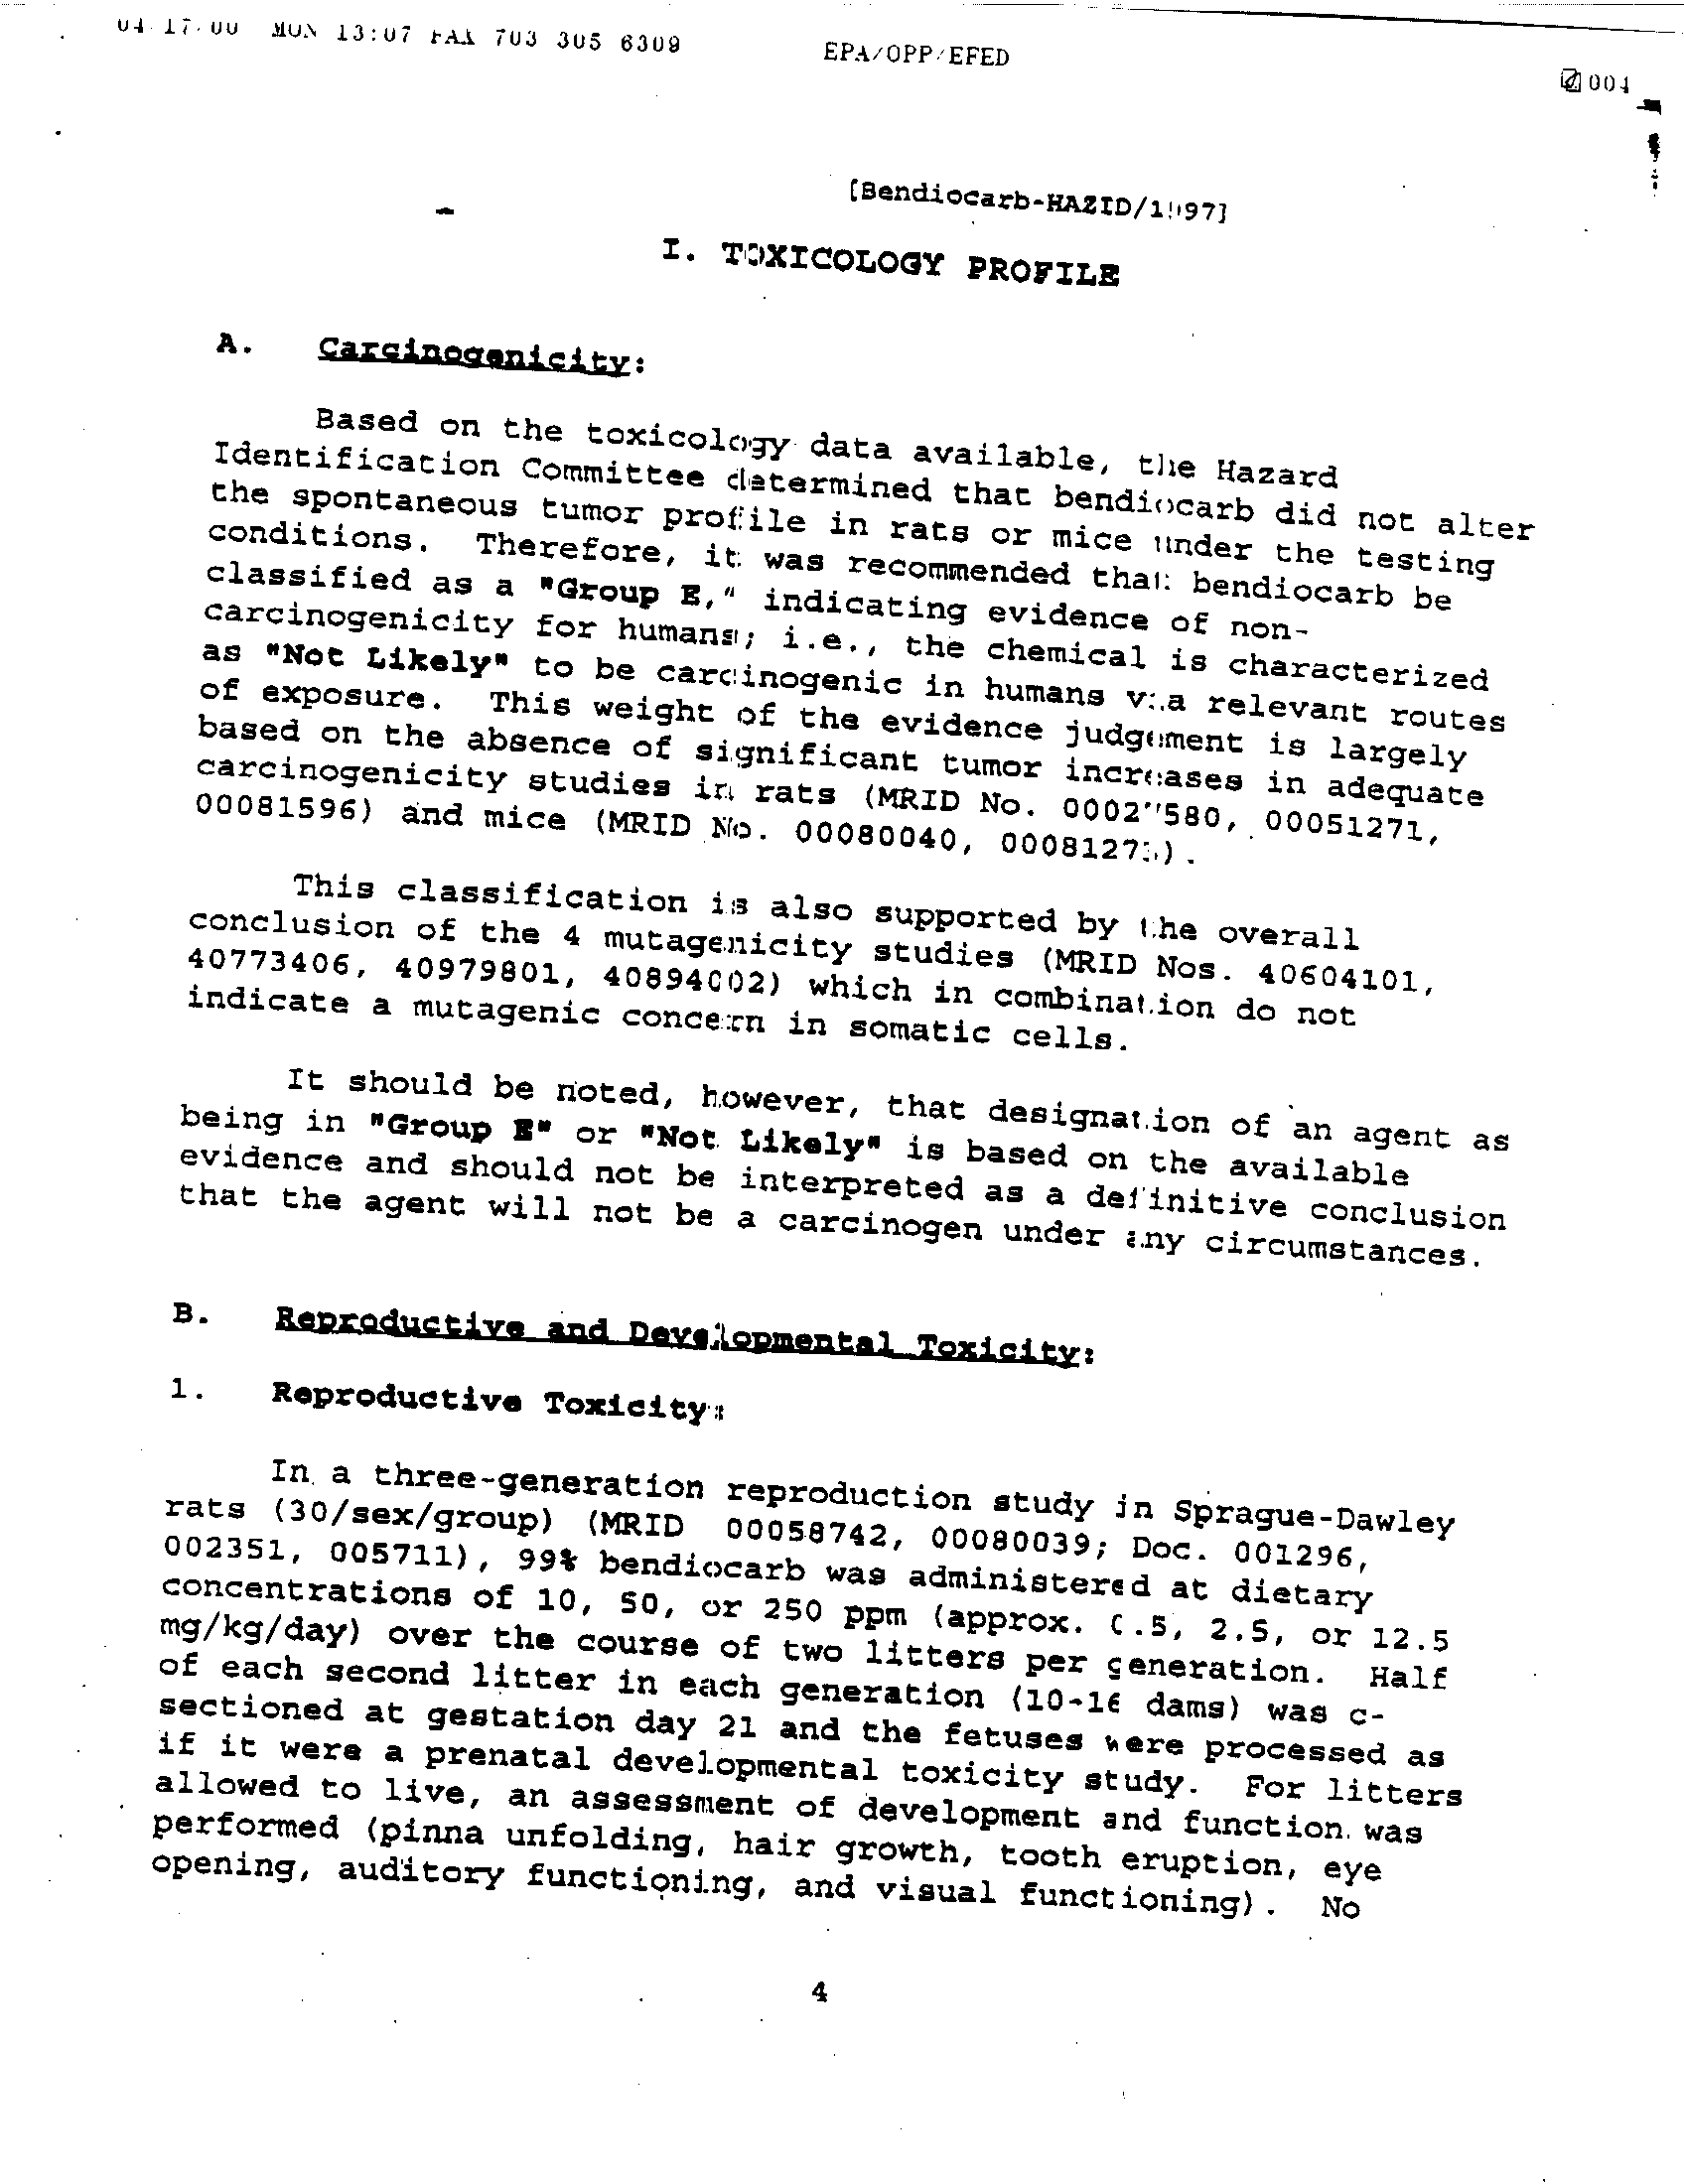 Environmental Protection Agency, Bendiocarb: Hazard Identification Committee Report, HIARC-HED document #012437, December 16, 1997, p. 4.